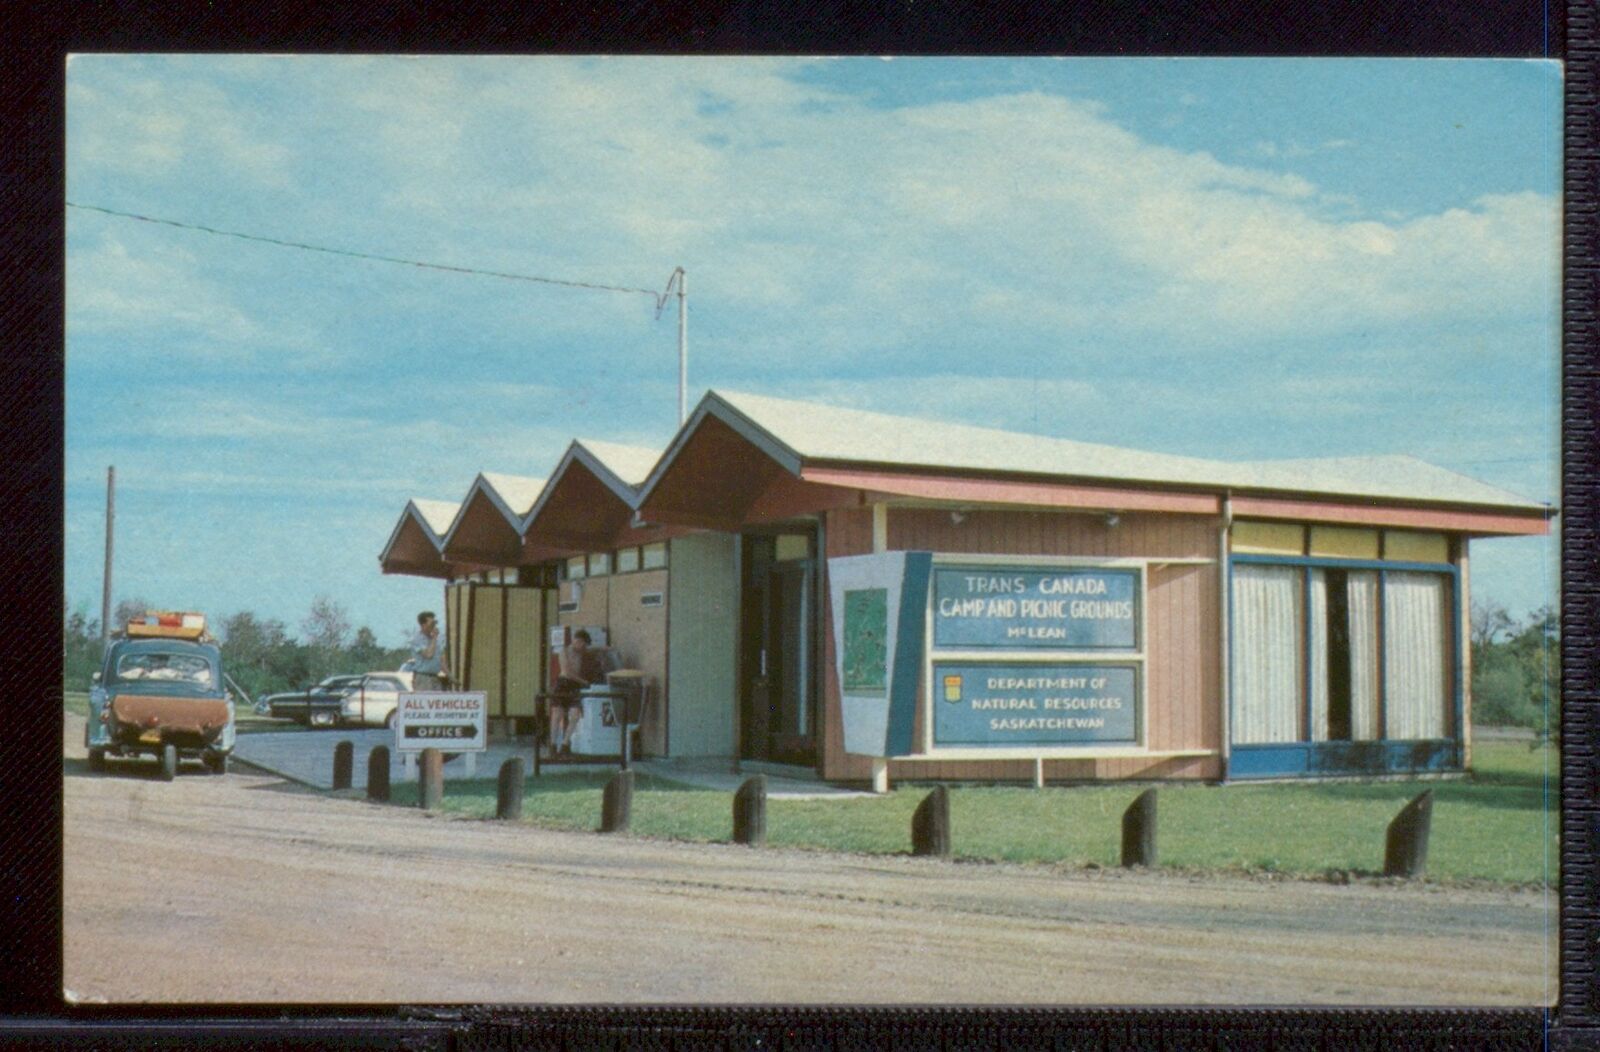 The Administration Building in the McLean Trans-Canada Campsite al- Old Photo